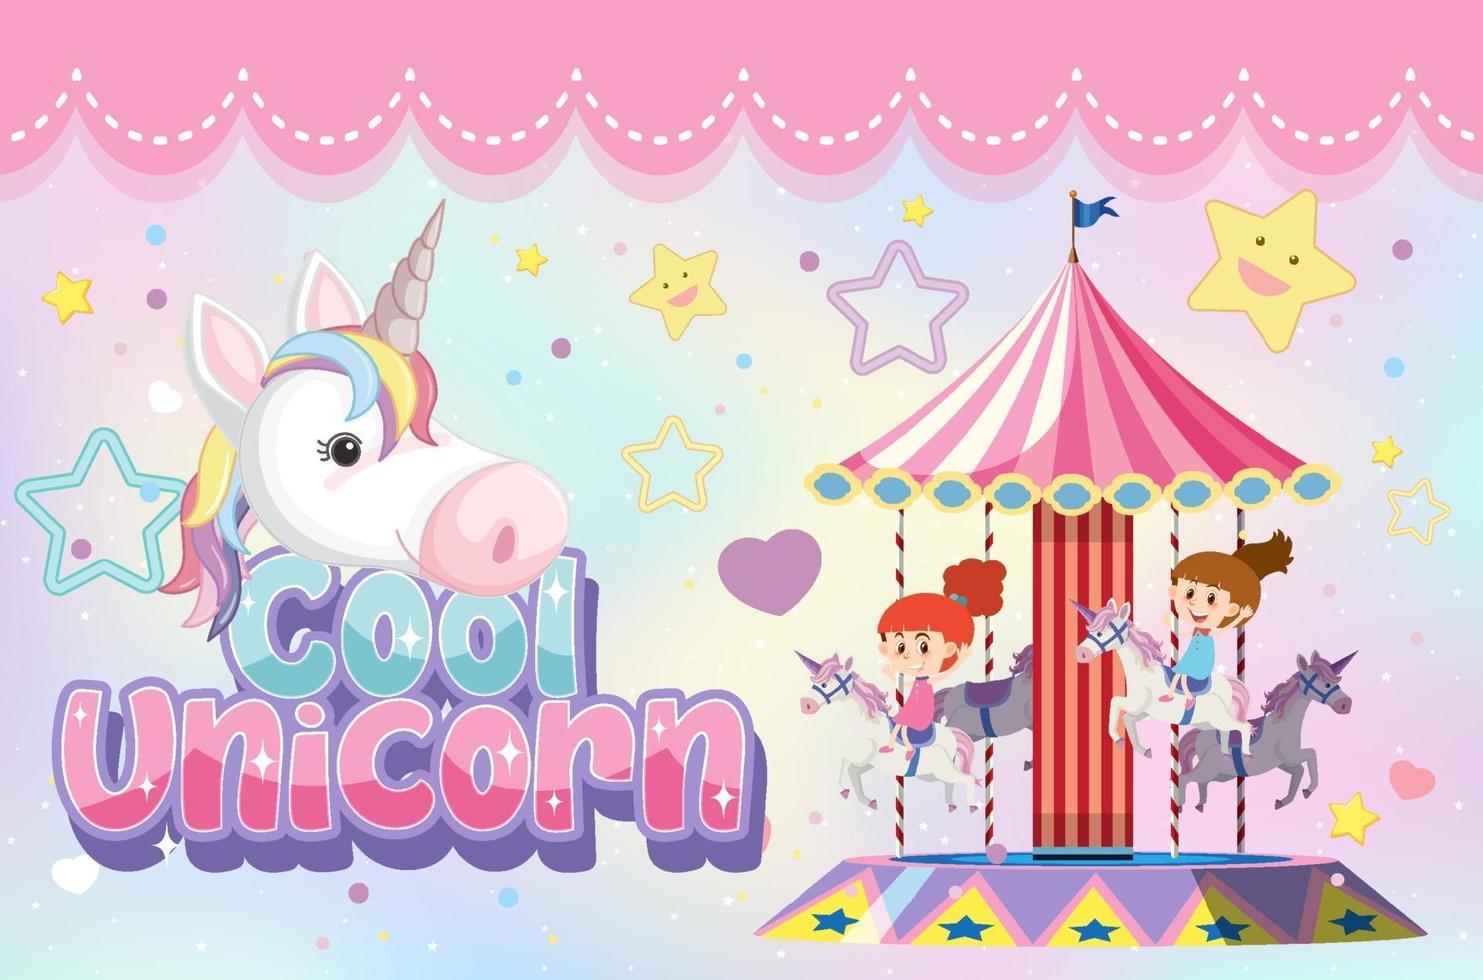 Cool unicorn font with kids playing carousel vector